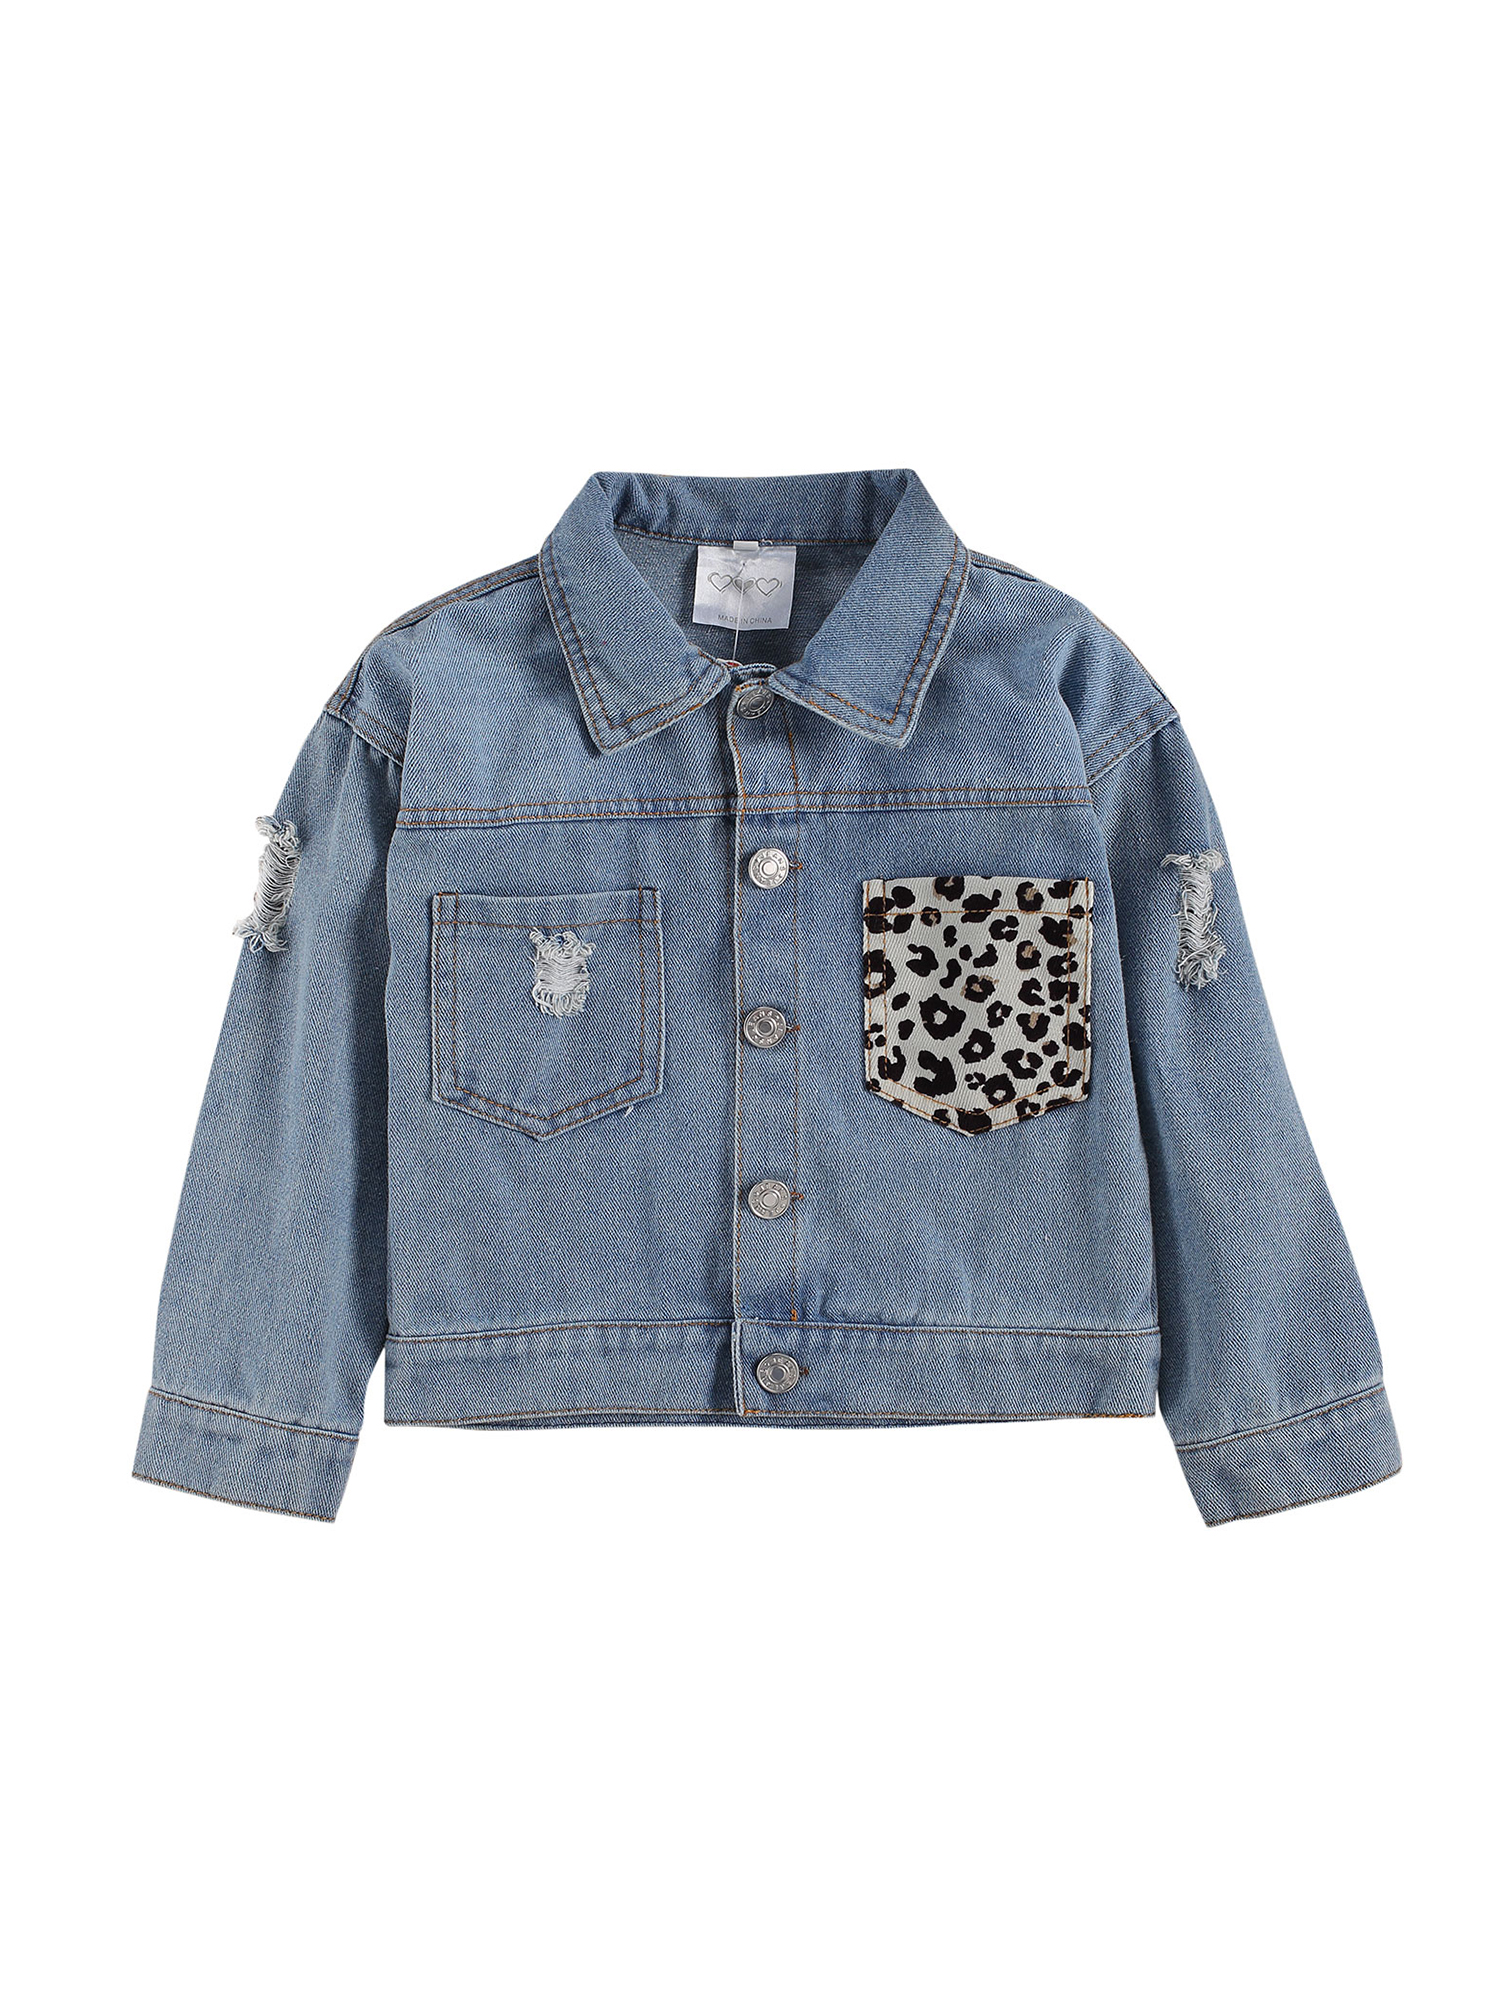 Canrulo Toddler Baby Girls Denim Jacket Leopard/Sequined Print Long Sleeve Single Breasted Coats Fall Winter Clothes Denim Leopard 1-2 Years - image 1 of 7